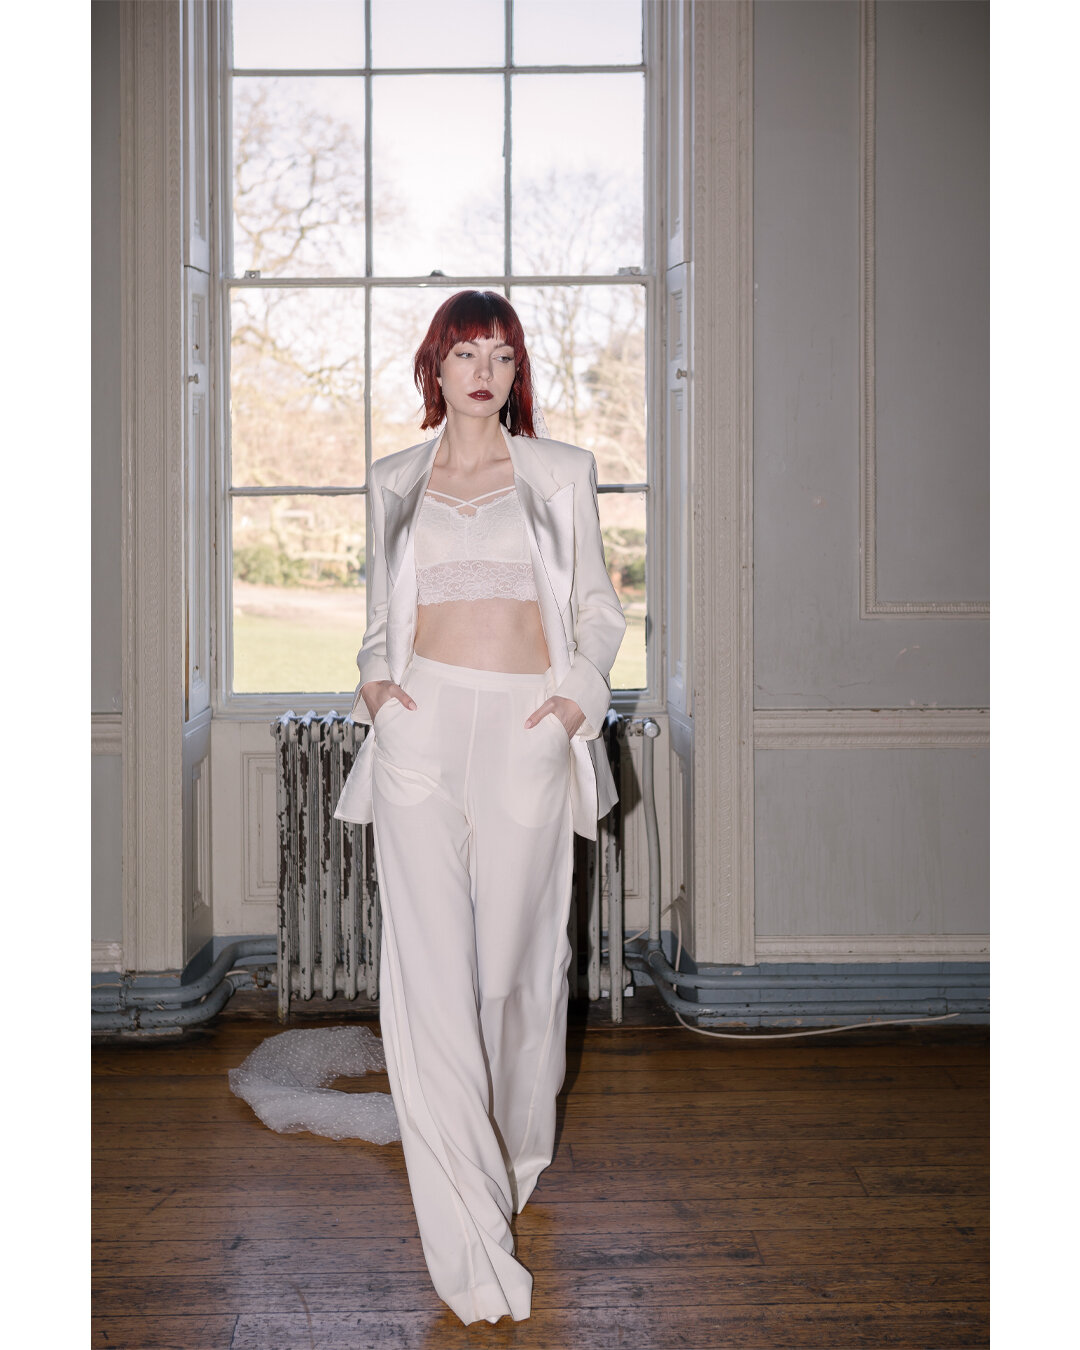 A moment for this bridal trouser suit and polka dot veil!

Here are ten from this stunning Vogue-inspired shoot in a London wedding venue with incredible natural light! I also used flash photography for some of this photoshoot to help mix it up. 

Ed